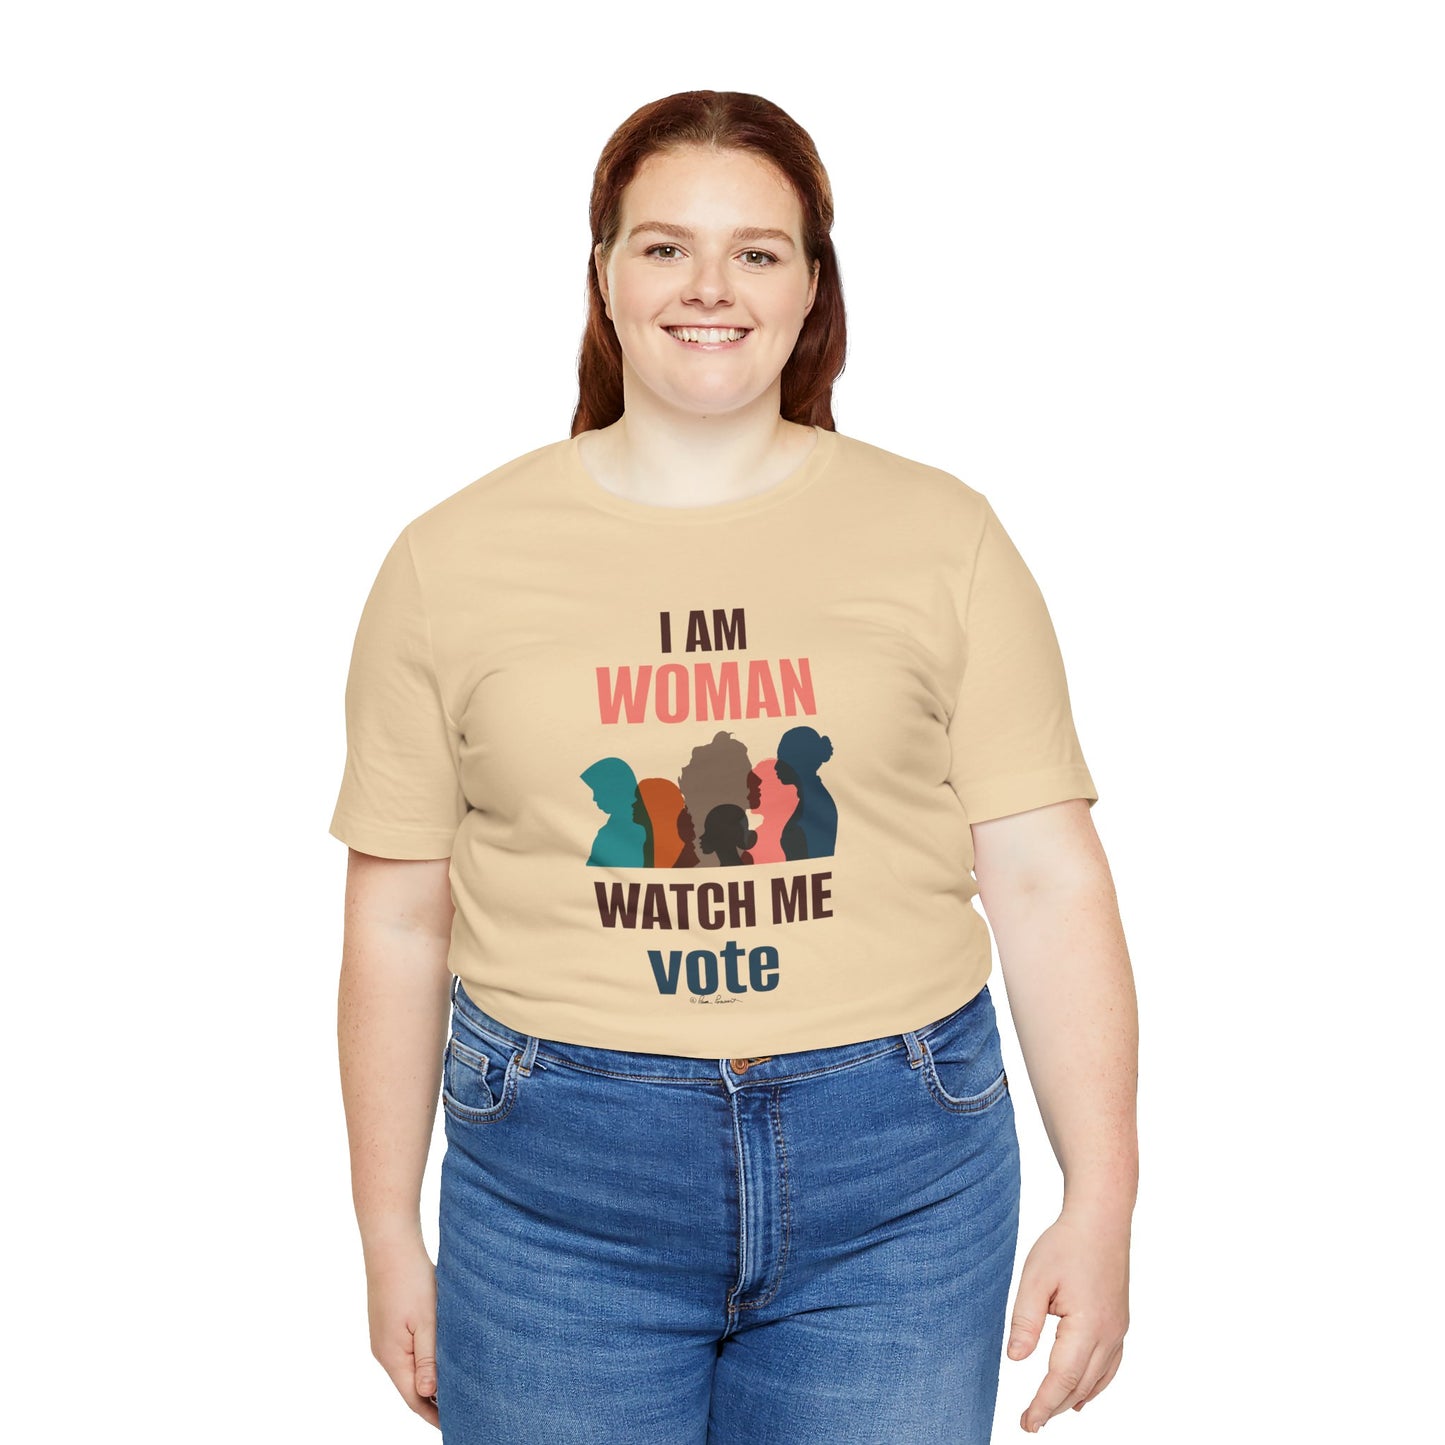 A woman in a Printify Voting Women's T-shirt, in a beige Bella + Canvas tee with "i am woman watch me vote" printed on it, and blue jeans, smiling at the camera.